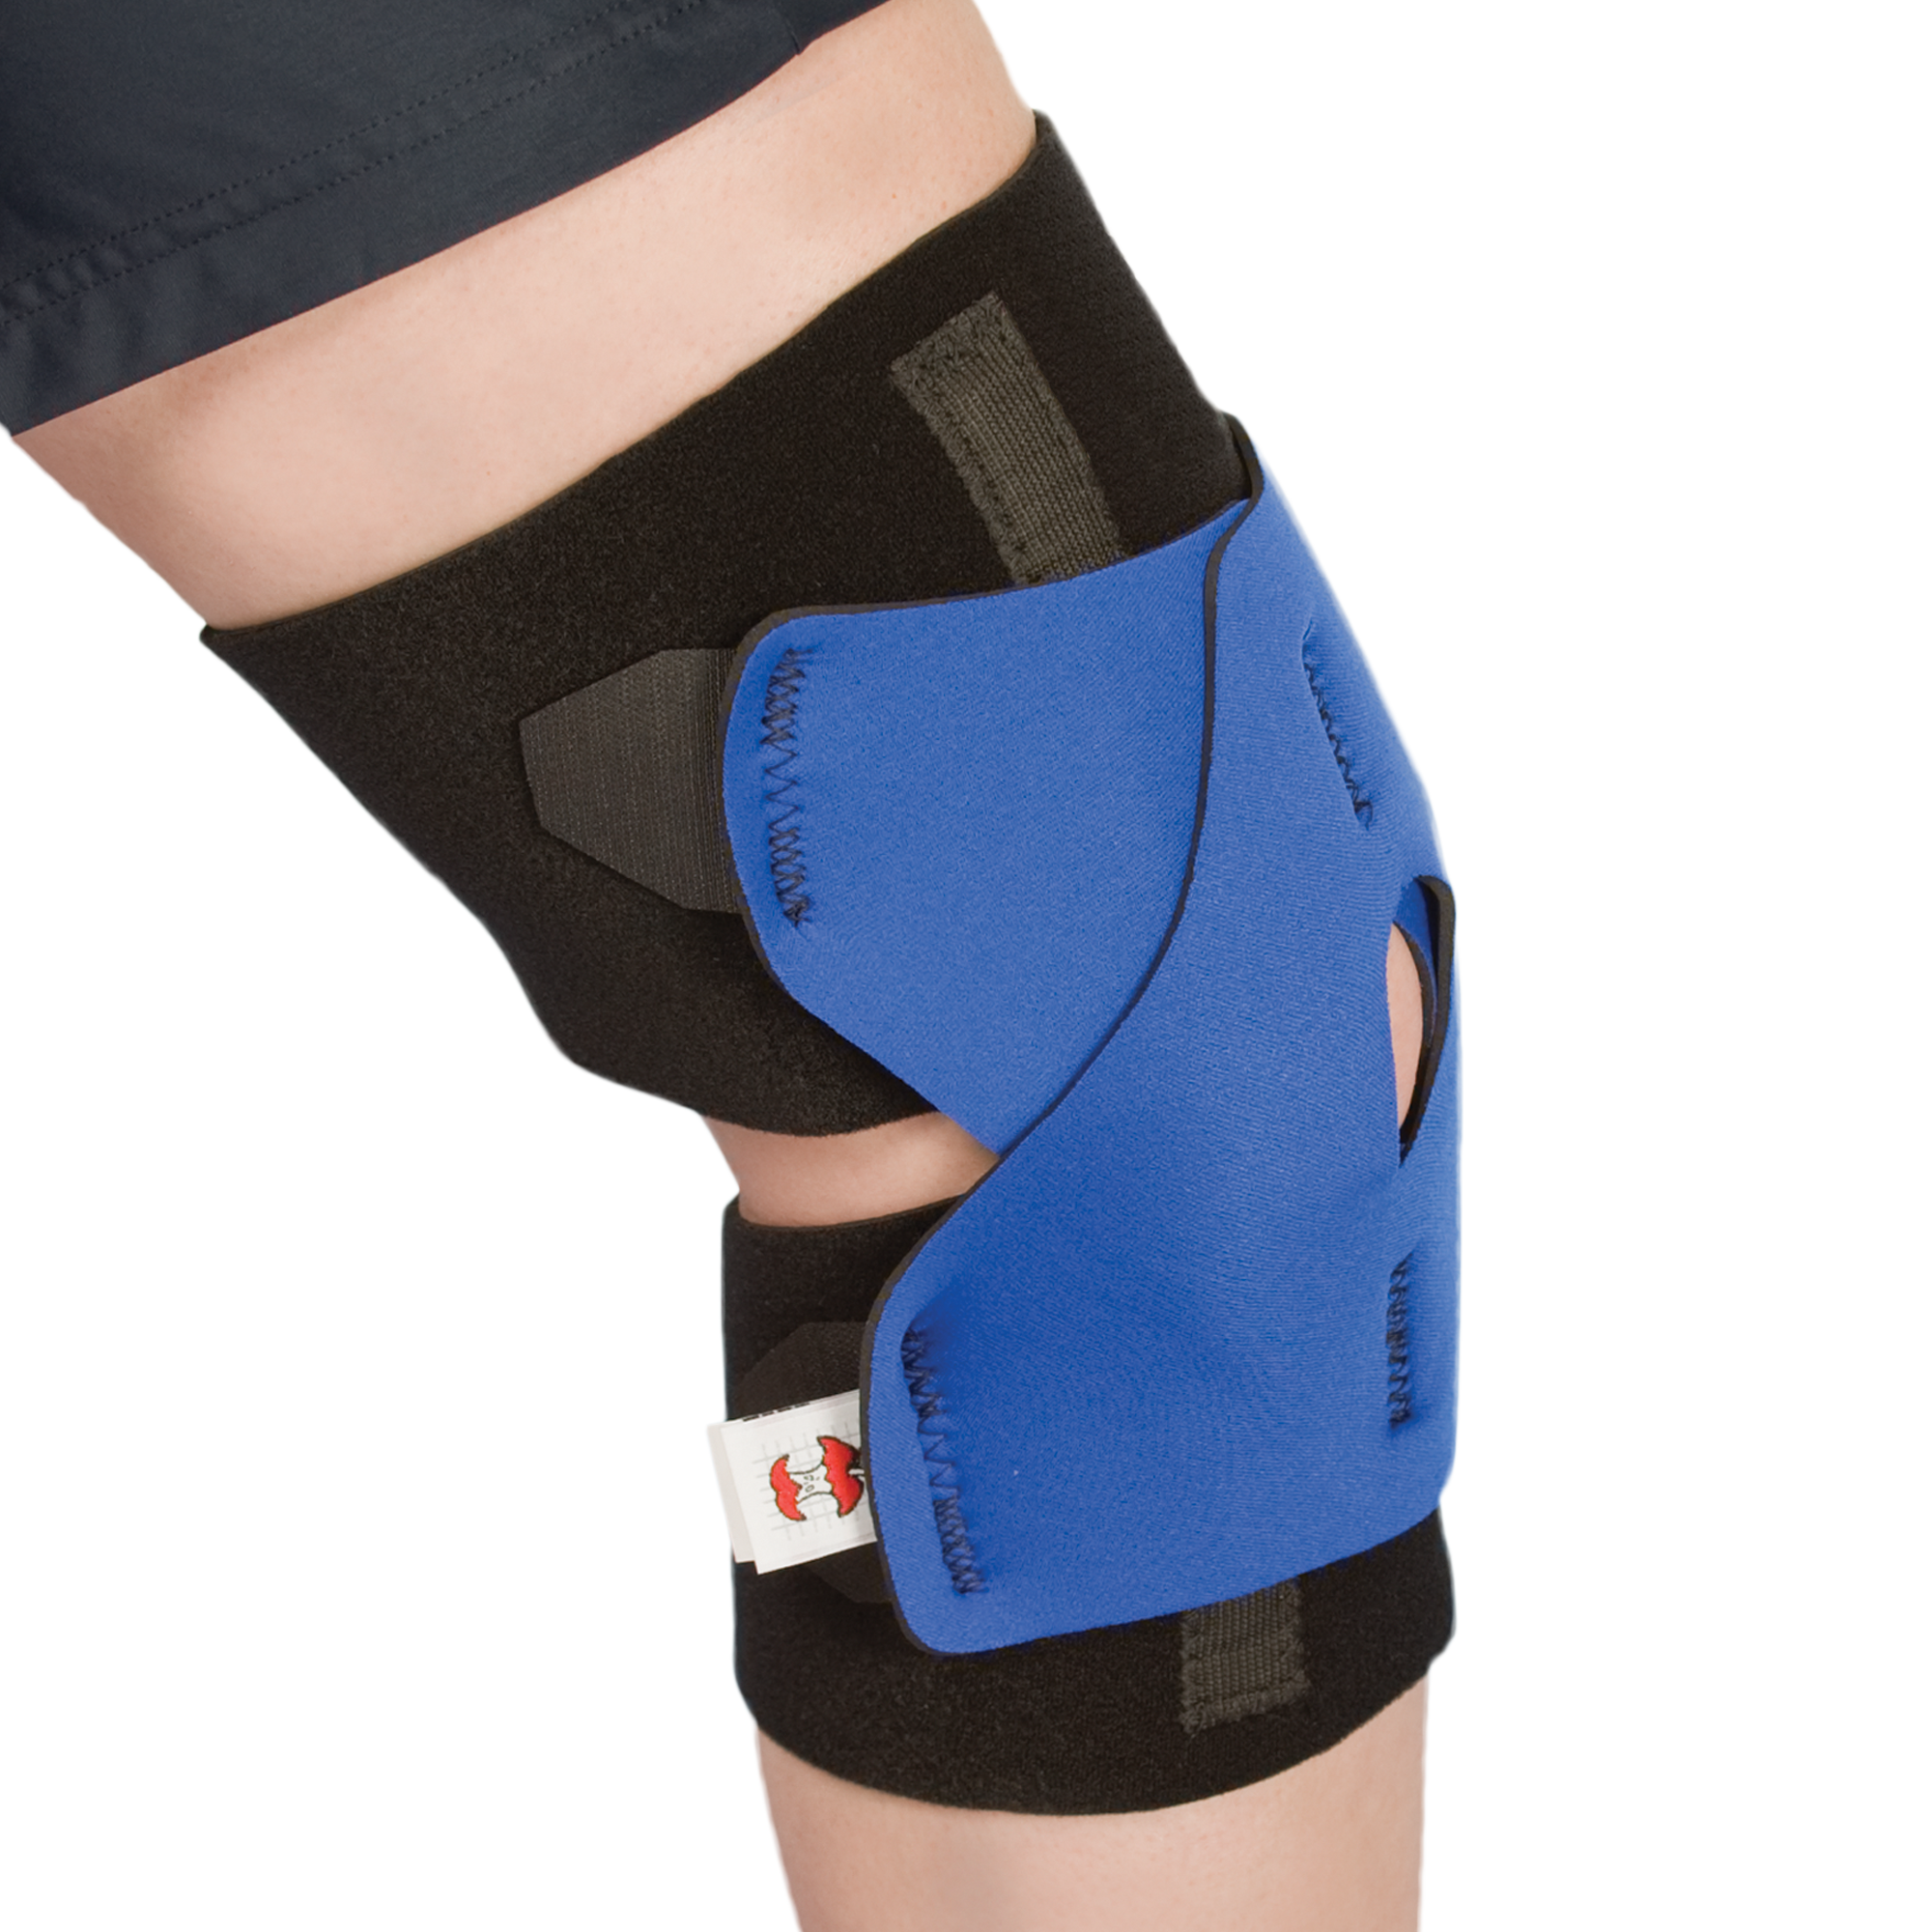 Performance Wrap™ Knee Support